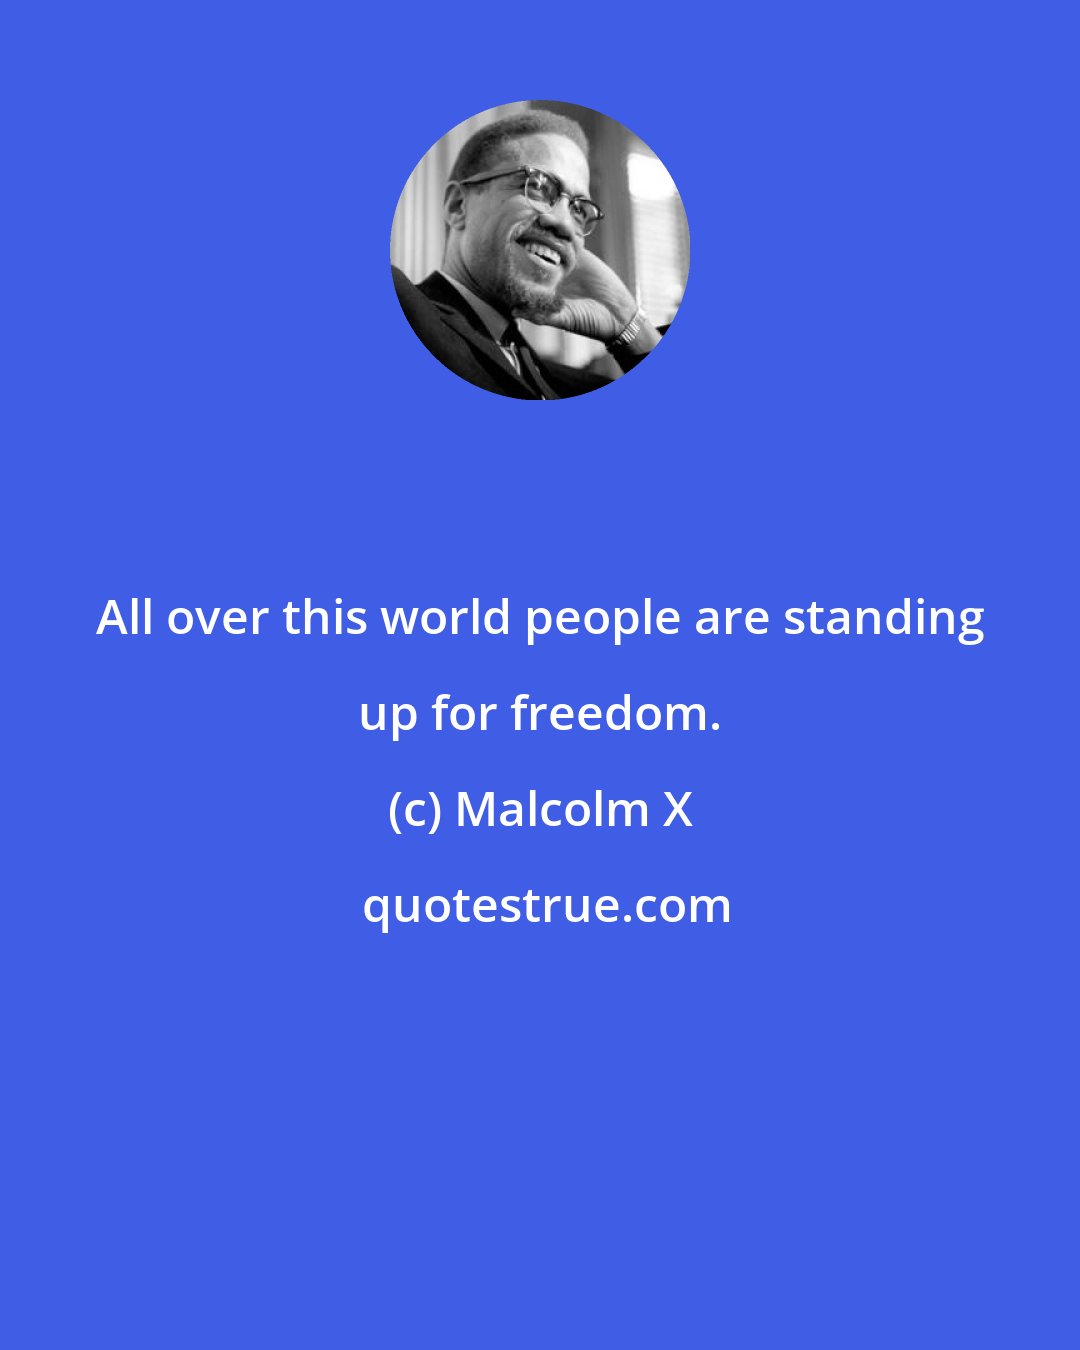 Malcolm X: All over this world people are standing up for freedom.